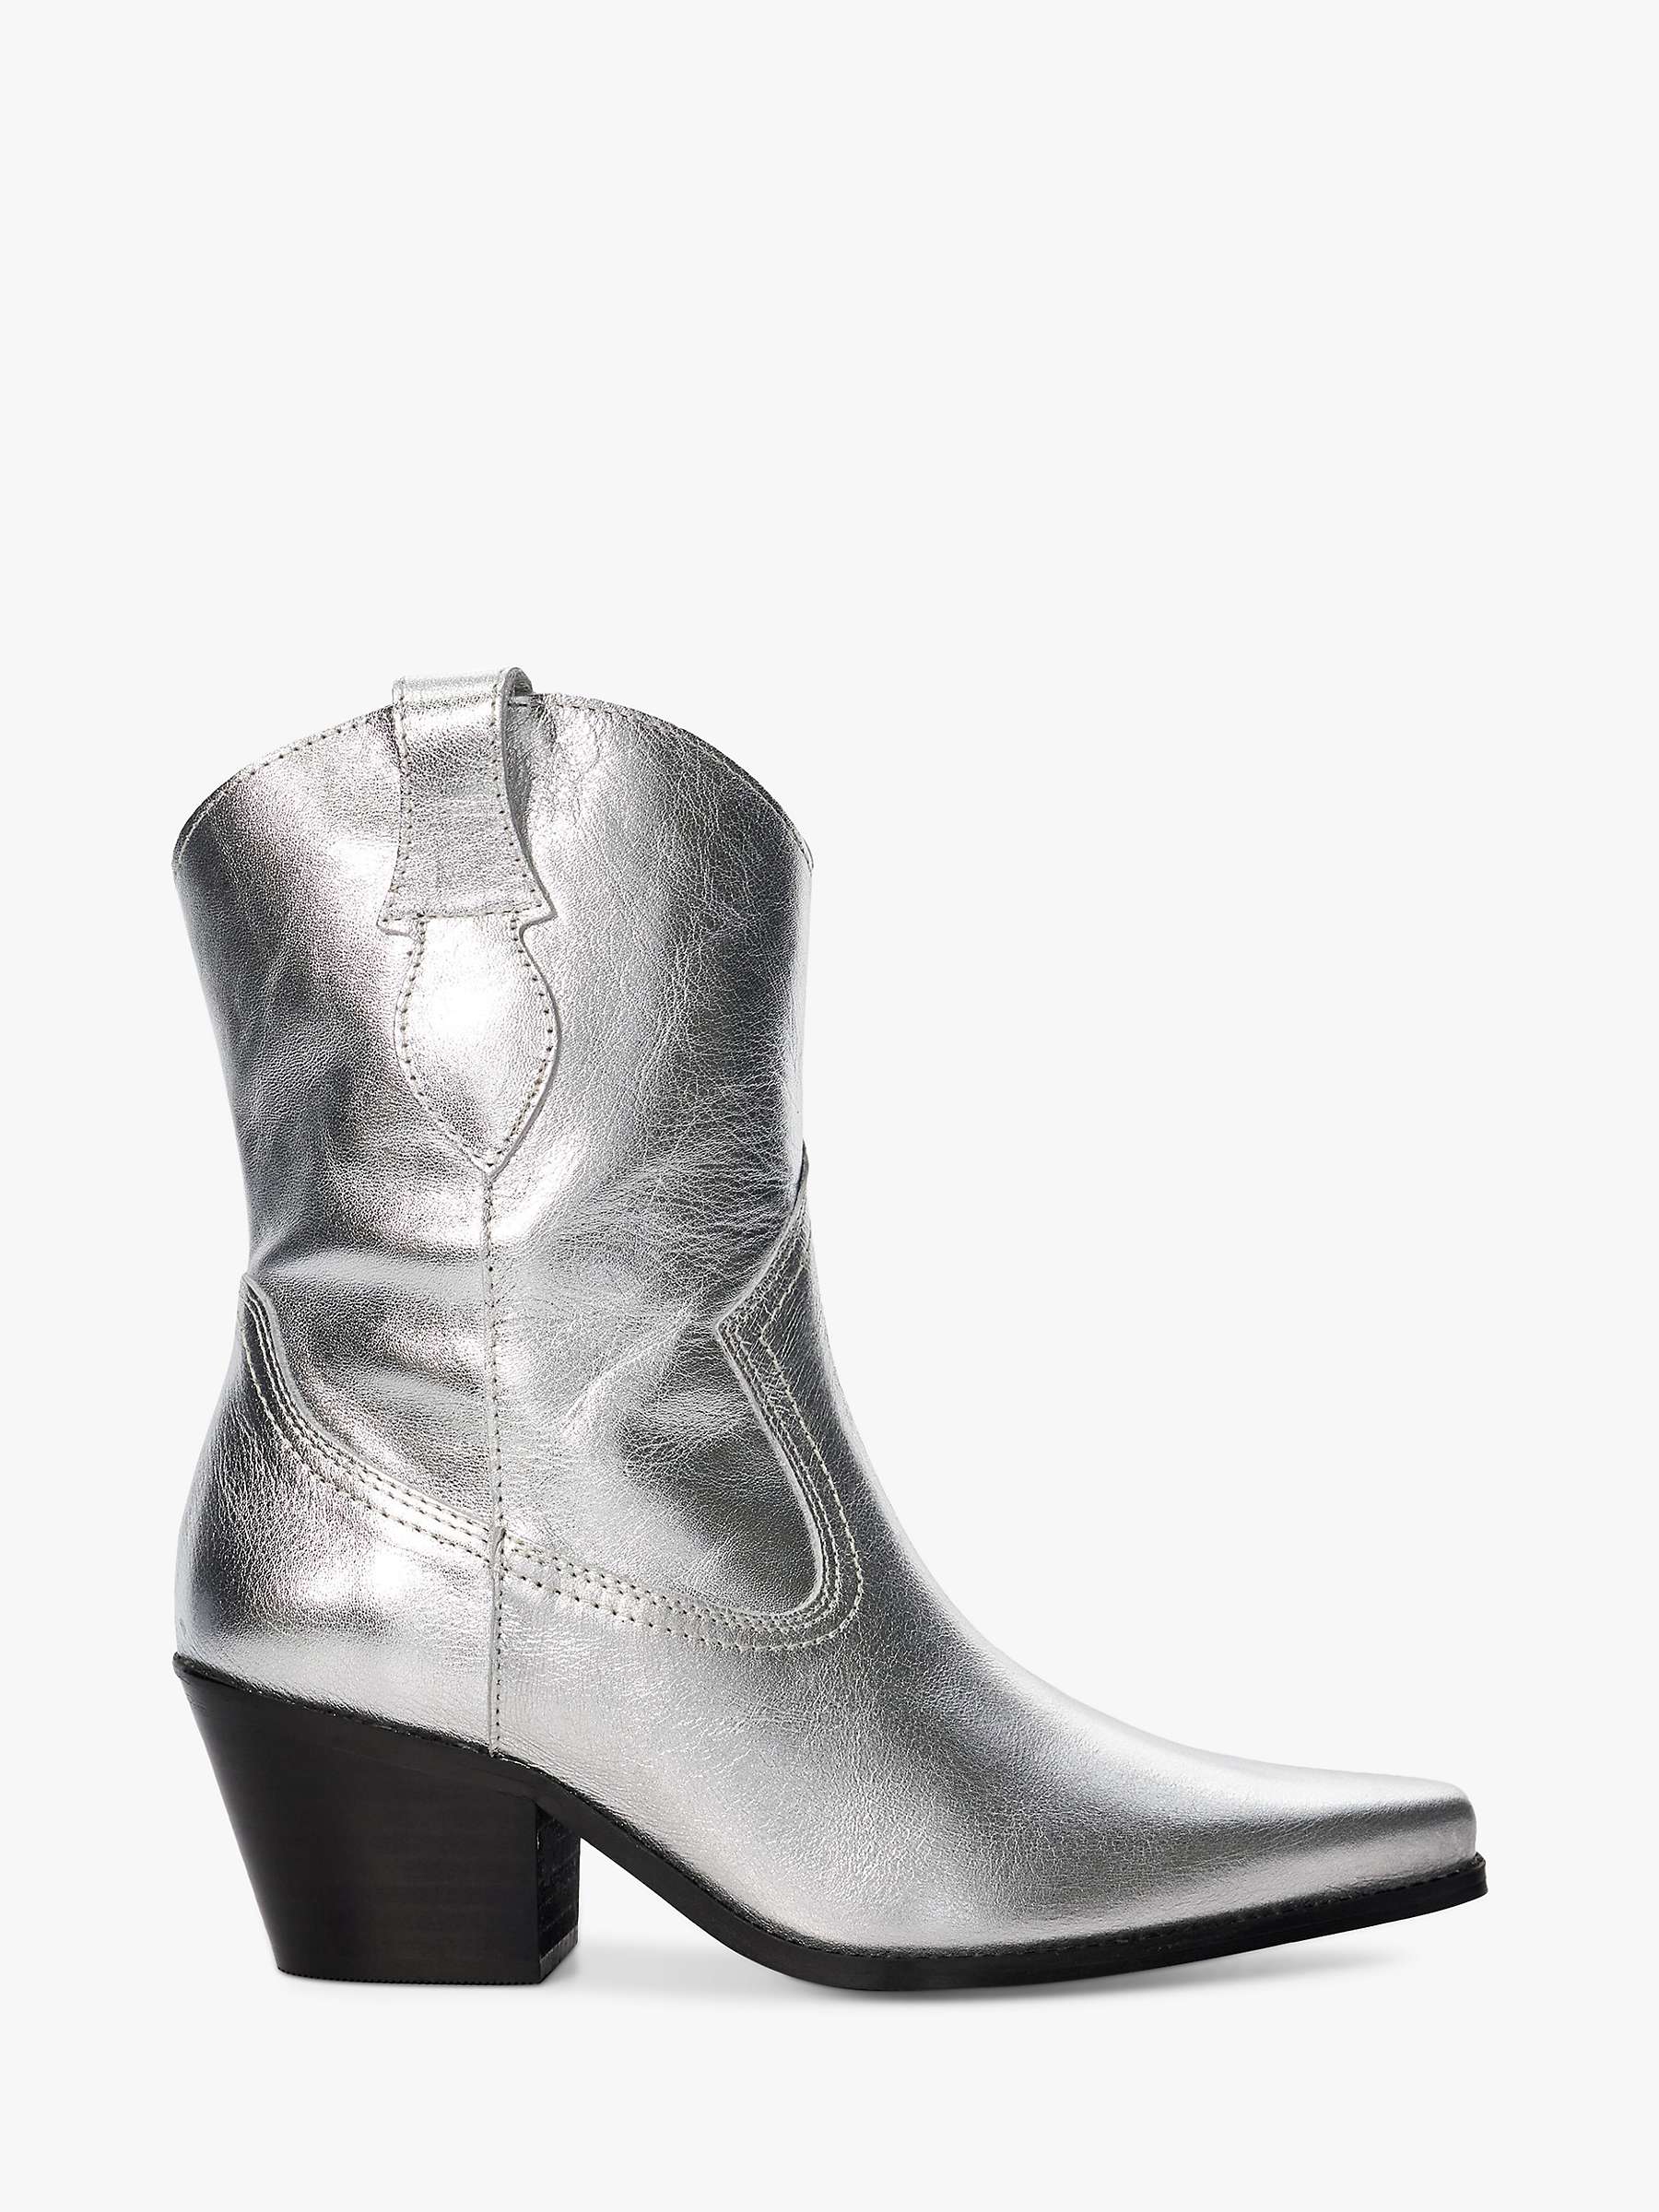 Buy Dune Pardner 2 Leather Cowboy Boots, Silver Online at johnlewis.com